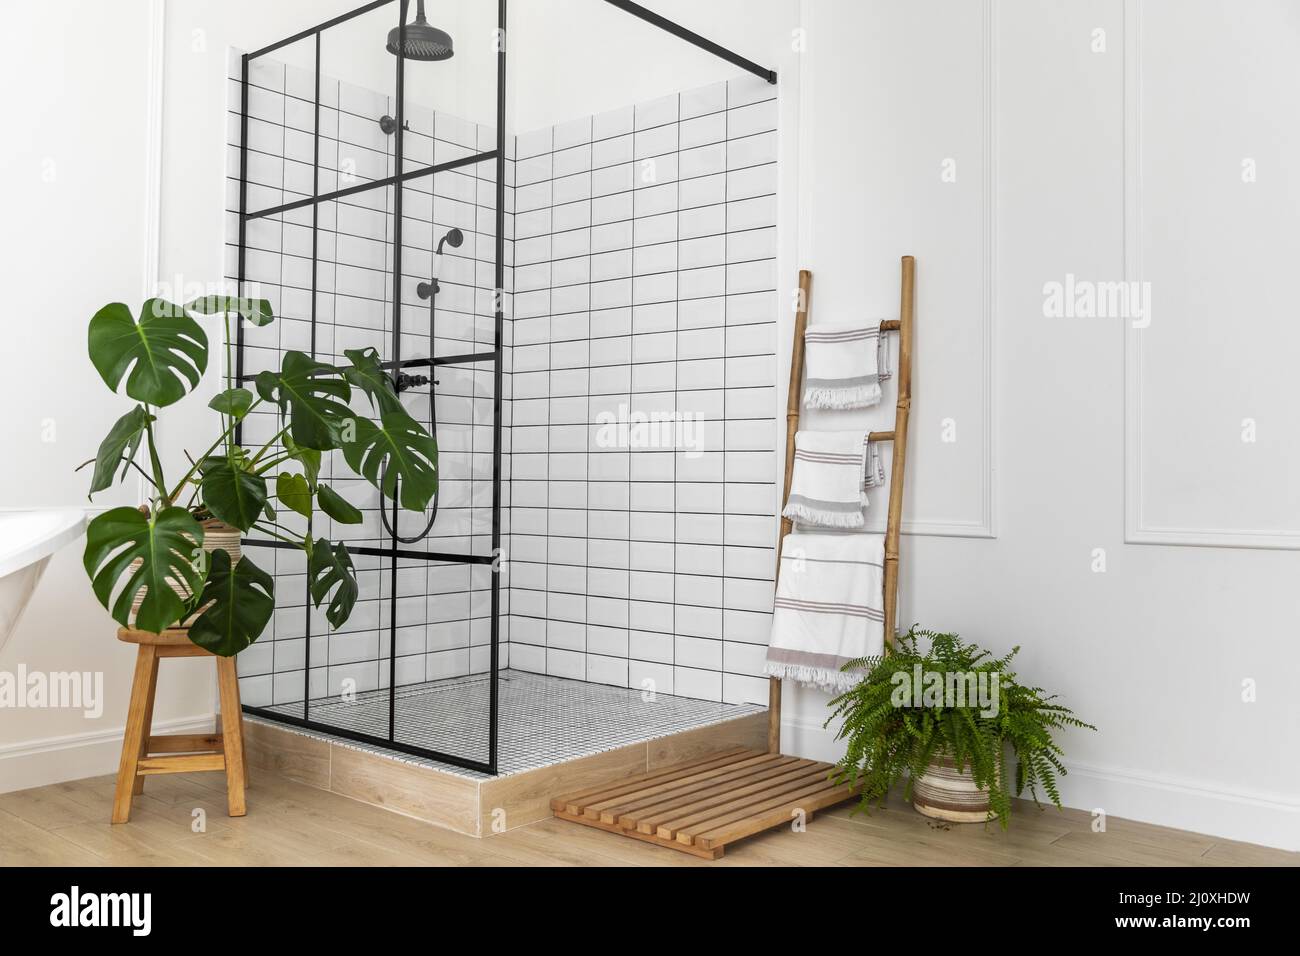 Bathroom interior design with shower. High quality beautiful photo concept Stock Photo